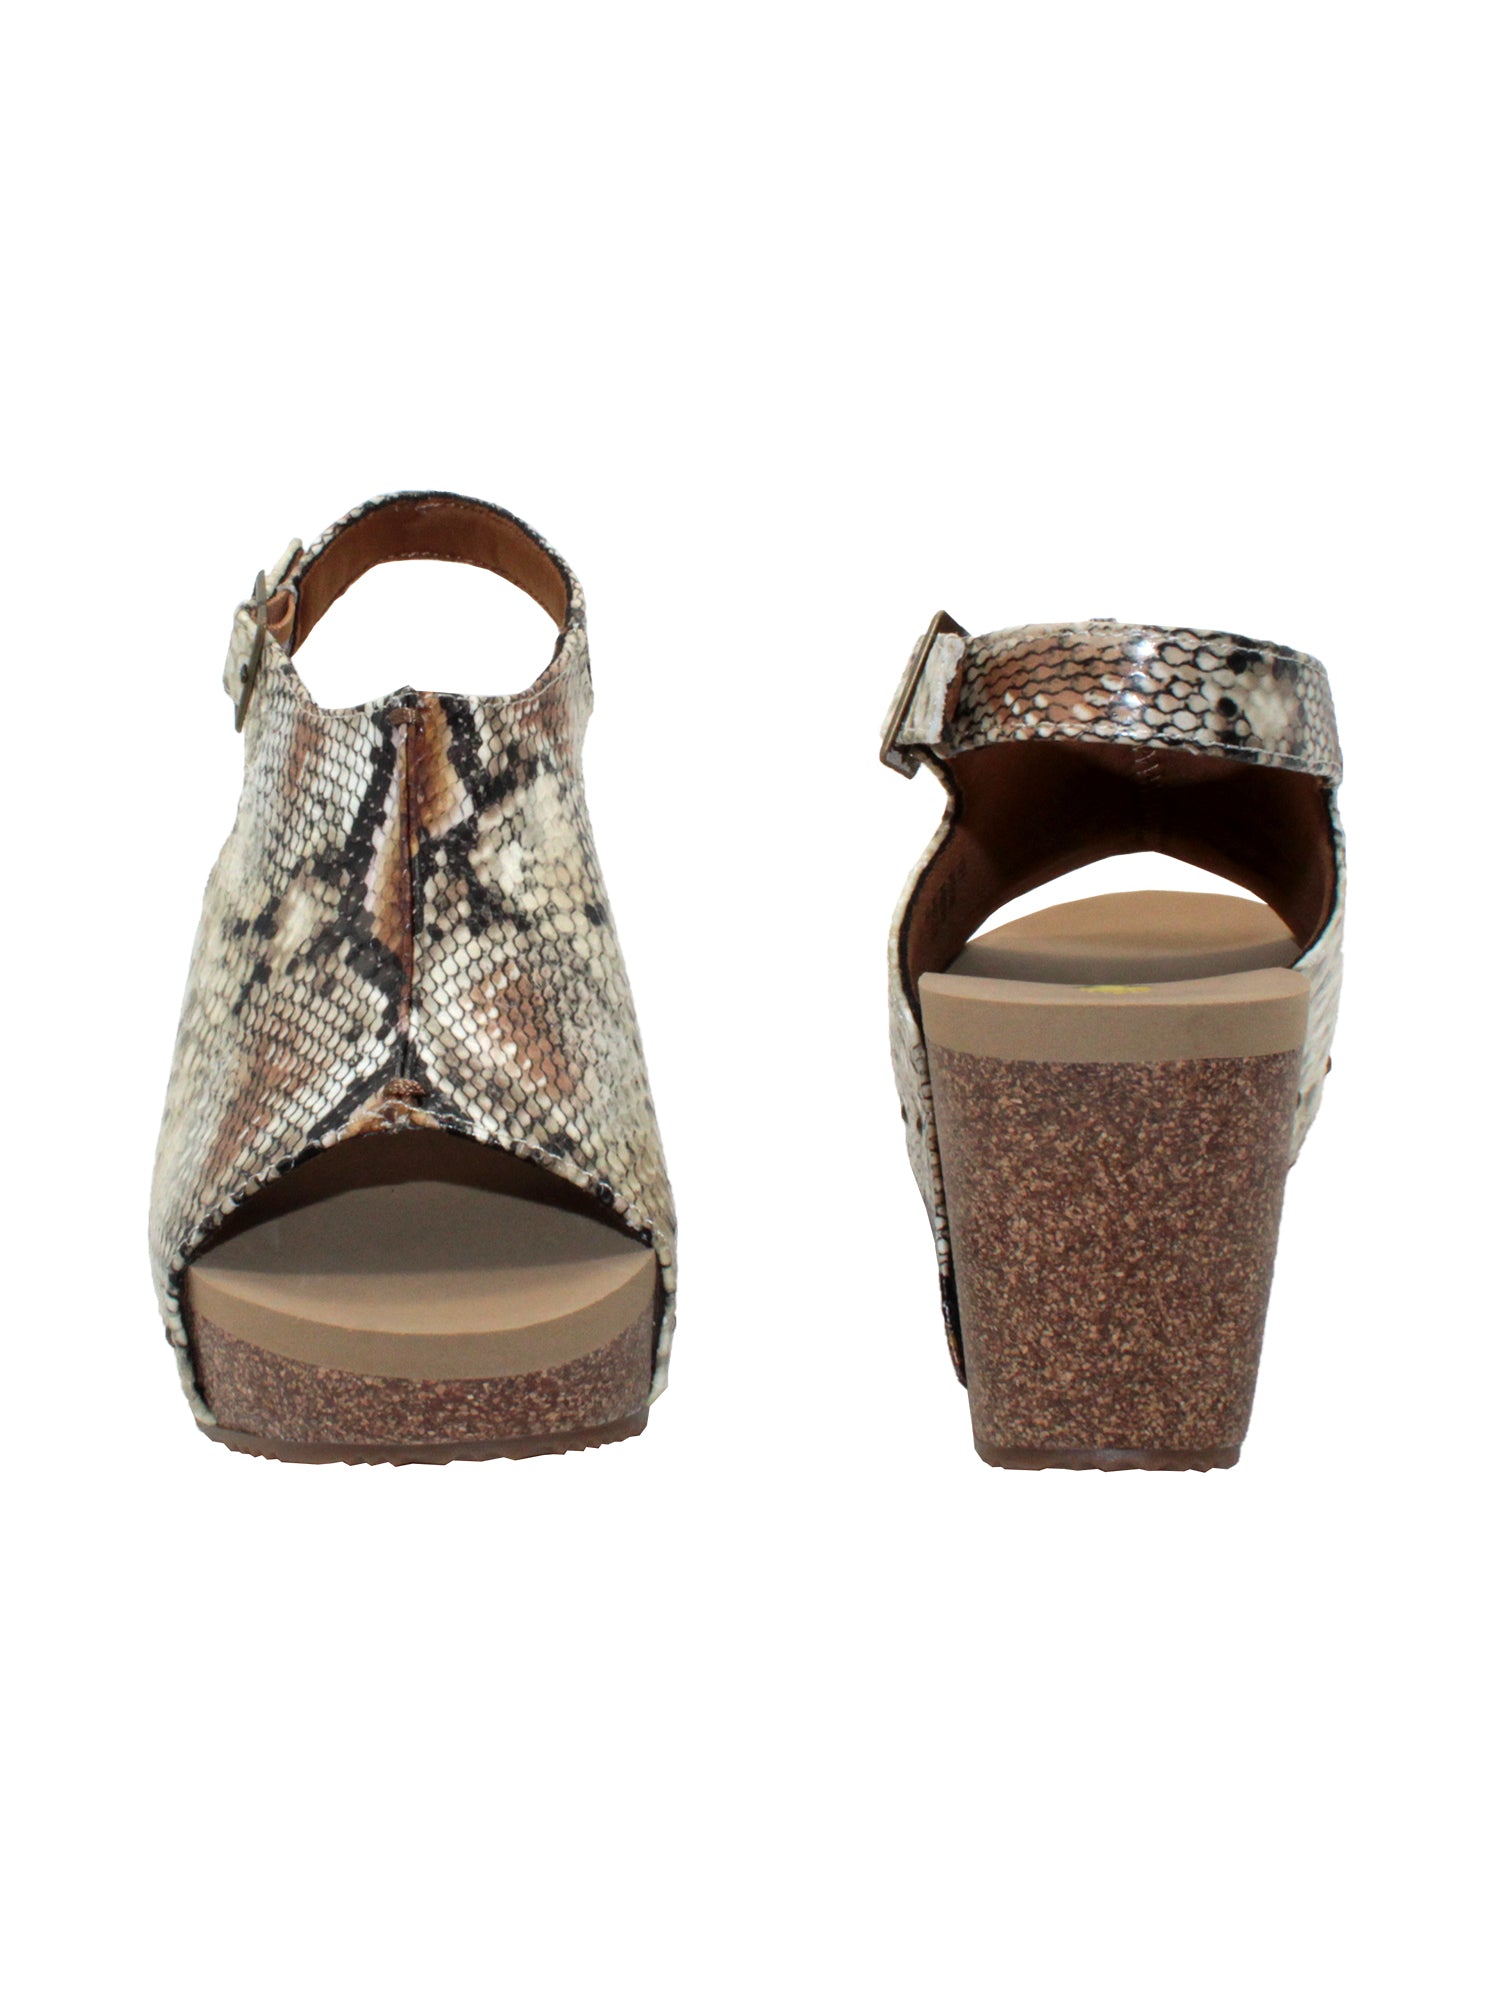 One of Volatile’s classic signature styles, the beige snake multi Division wedge sandal brings ultra-comfort to casual fashion like no other. The adjustable ankle strap offers stability, the padded lining and signature ultra-comfort EVA insole keeps feet feeling rested even after a full day of adventure, and the rubber traction outsole means these are safe for walking on any surface. Pack these for your next trip to wear with shorts for sightseeing and a flowy dress for special events. front and back